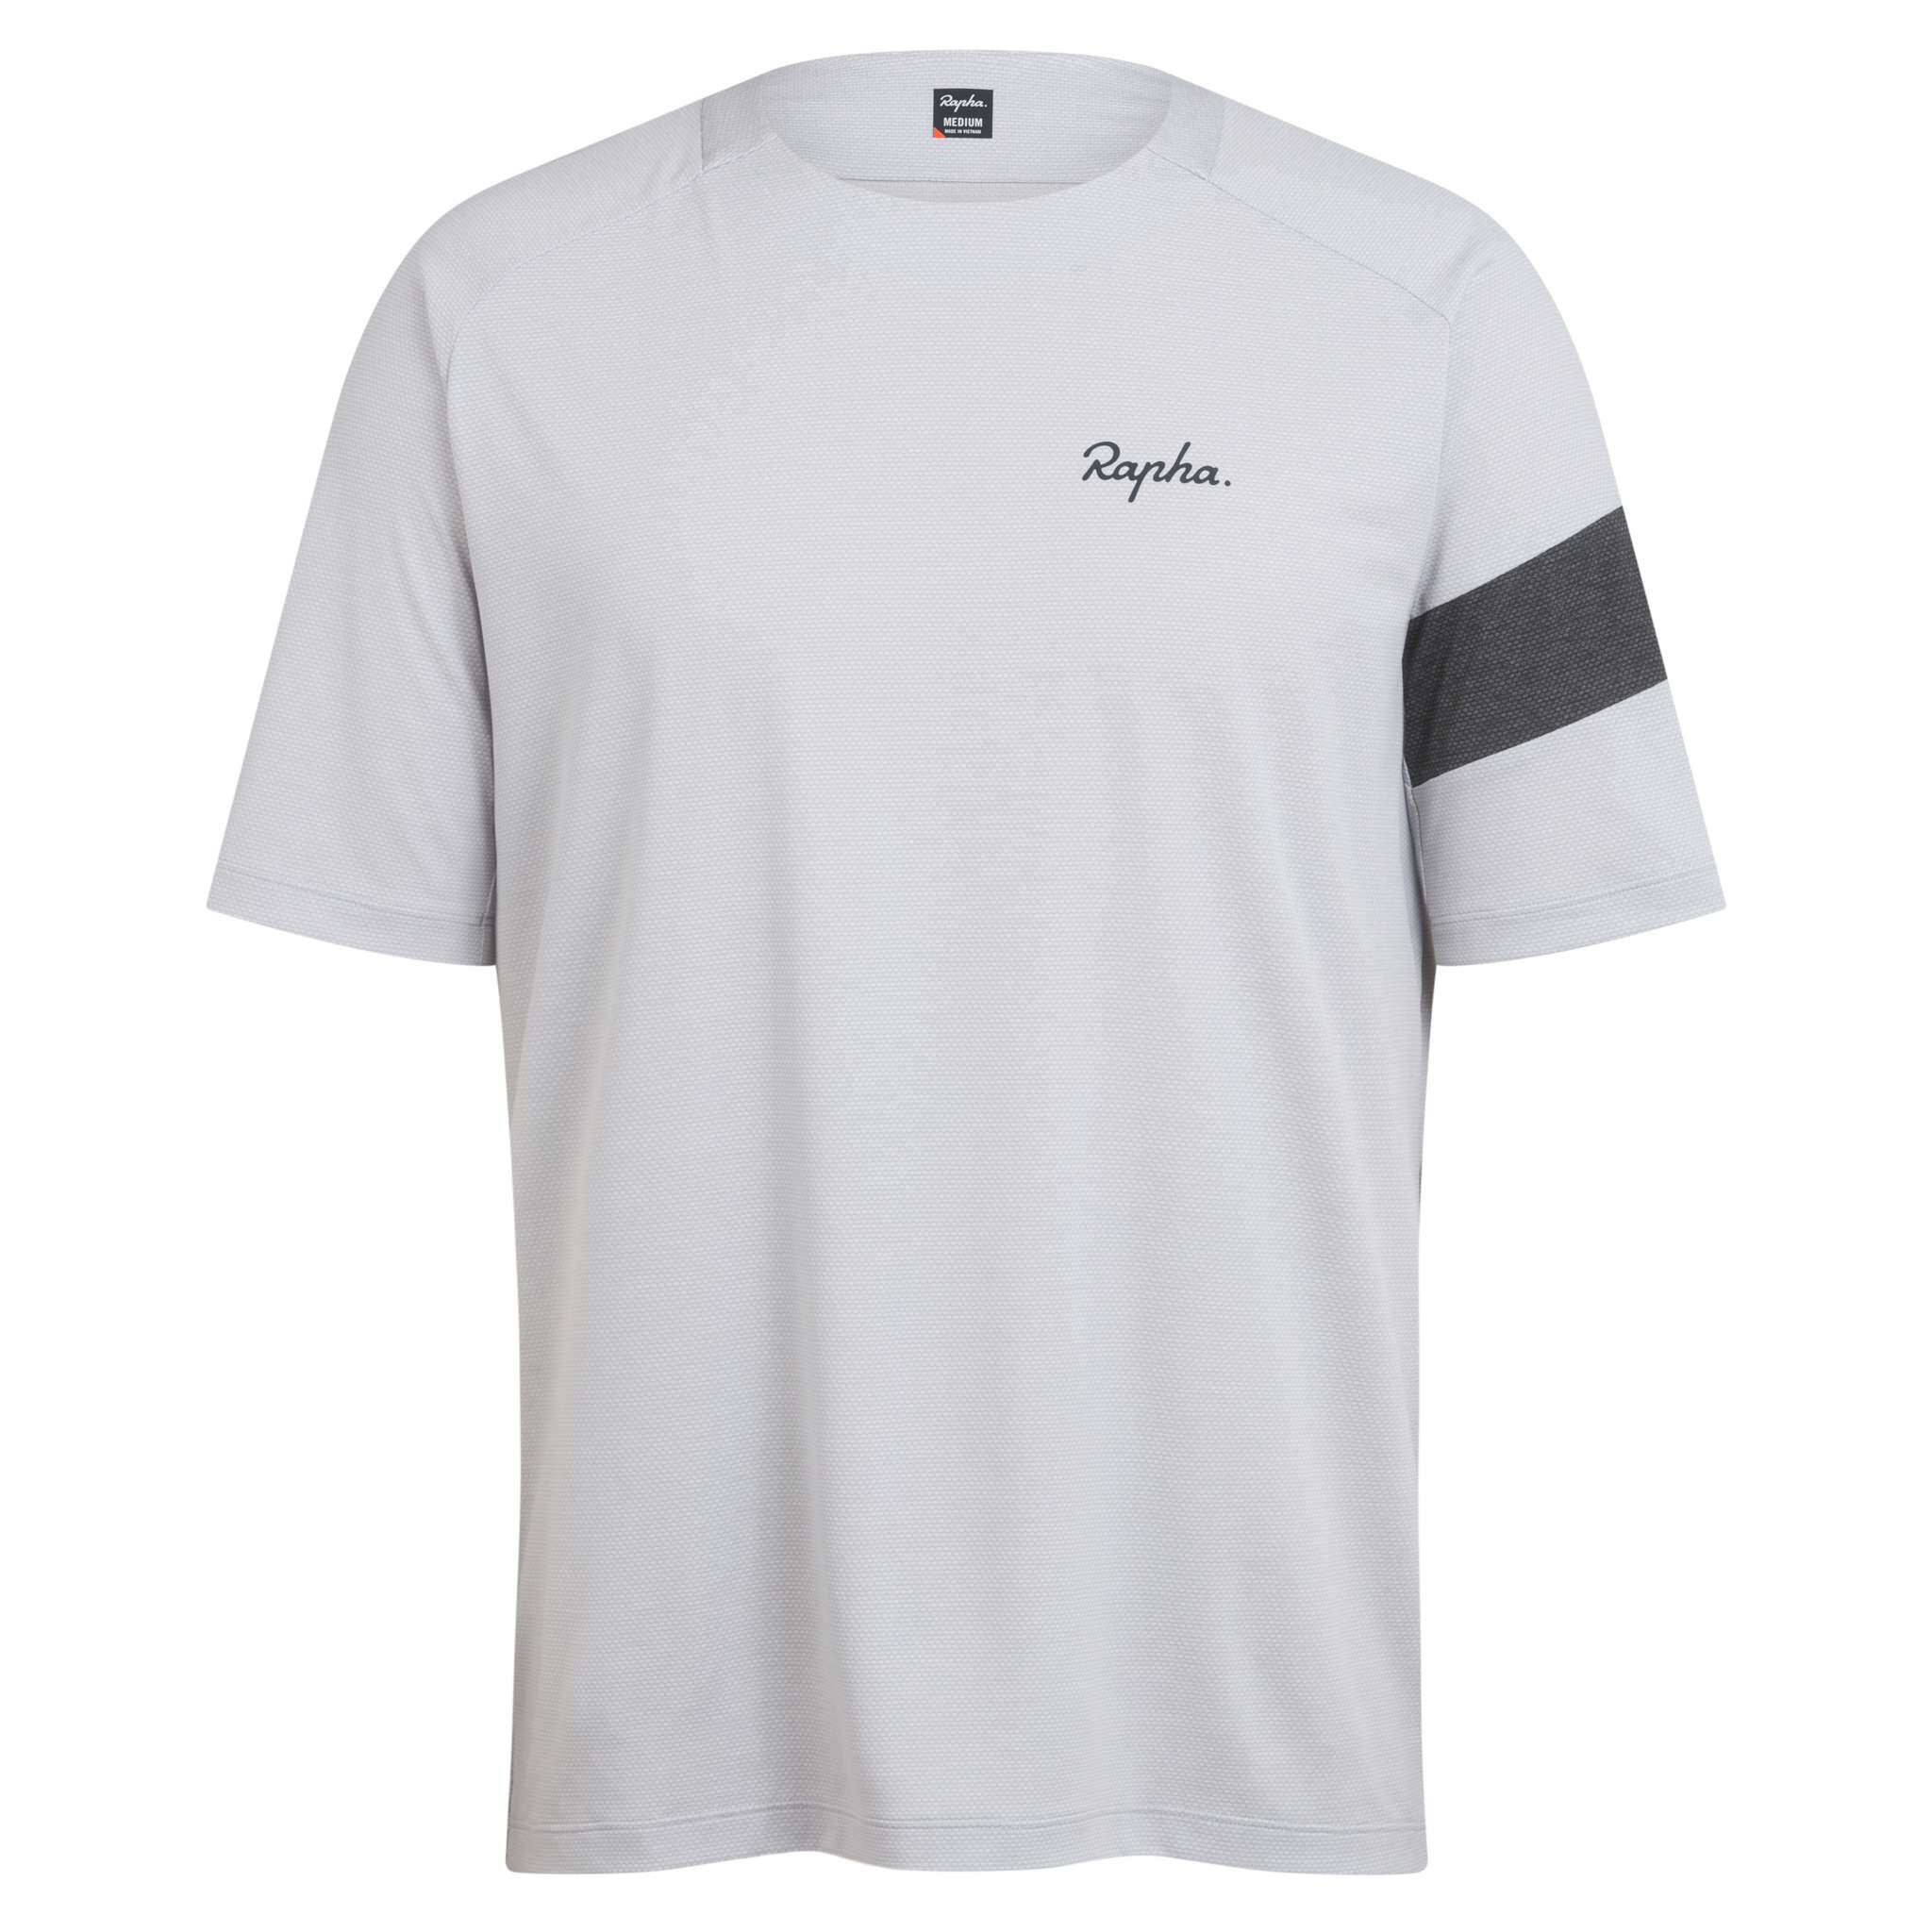 Trail Technical T-shirt - Micro Chip _ Anthracite_1.jpg